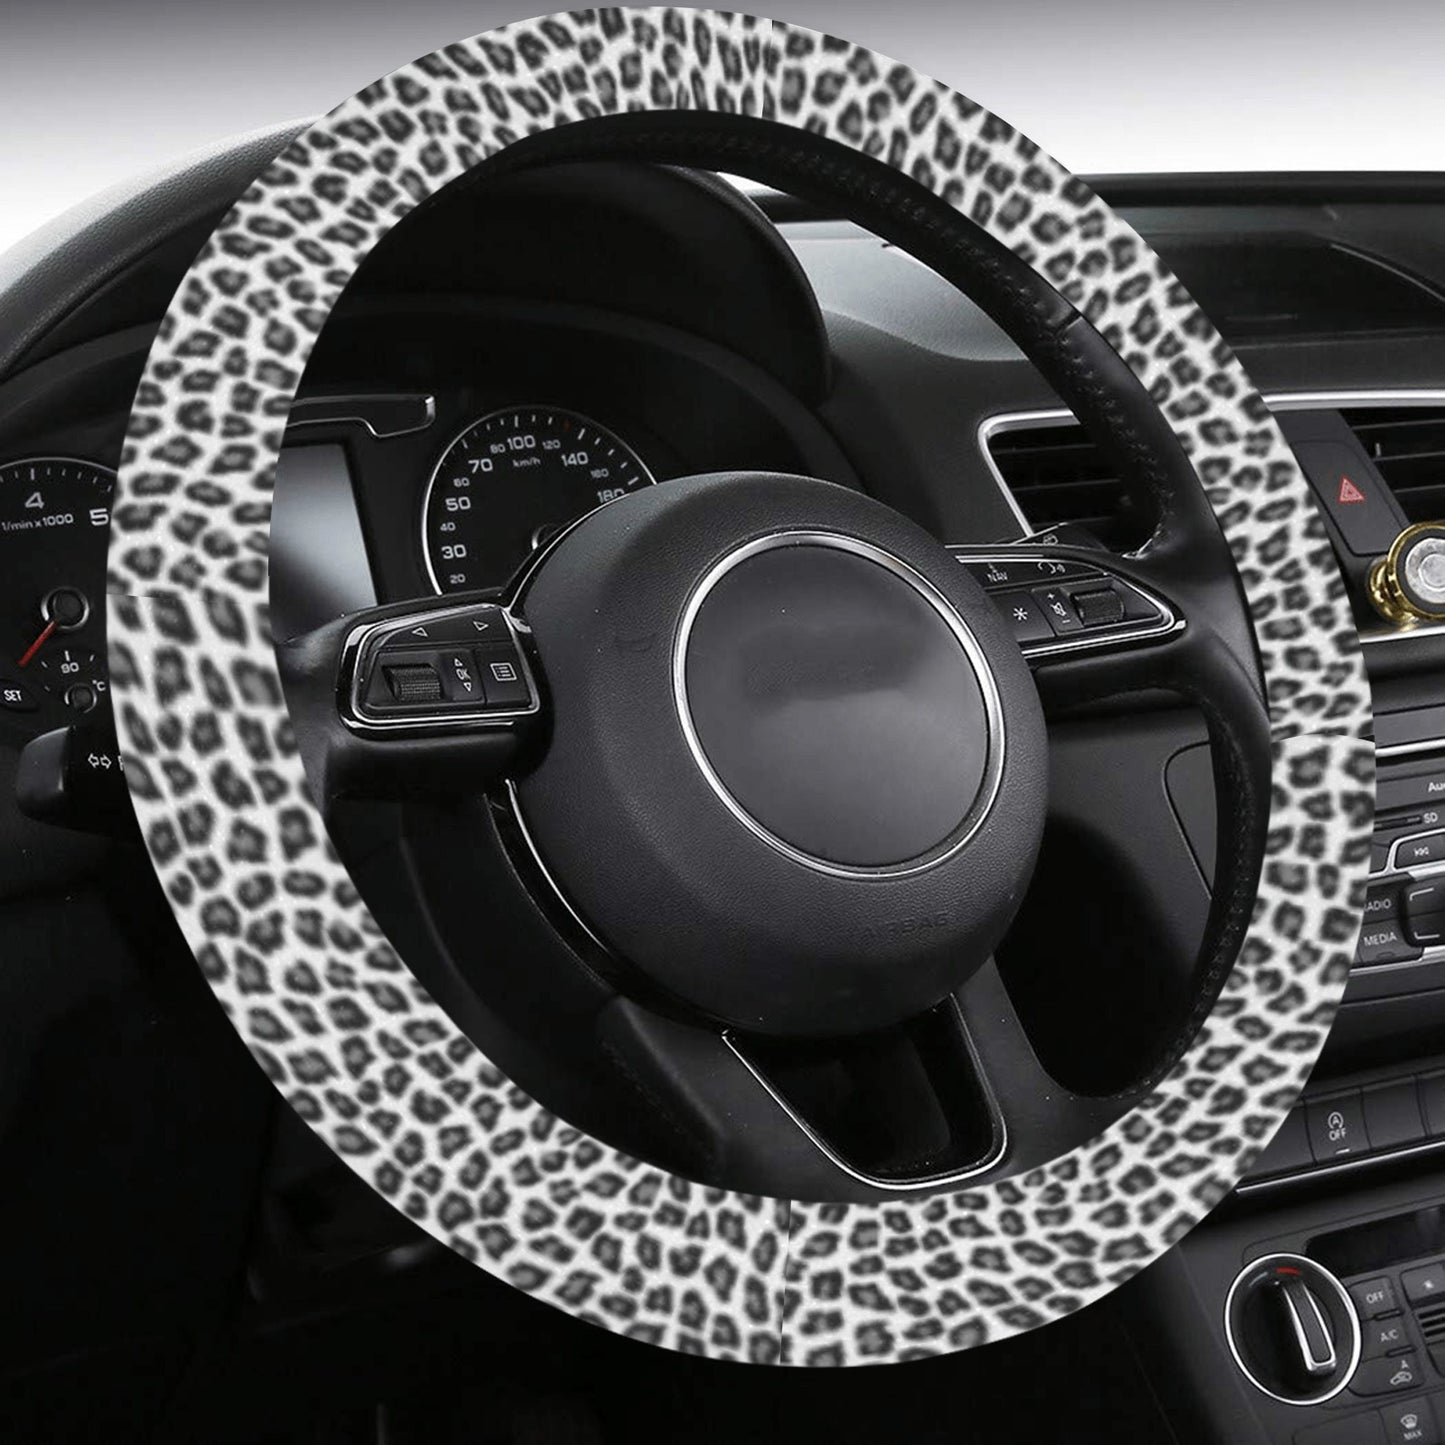 Snow Leopard Steering Wheel Cover with Anti-Slip Insert, Black white Animal Print Car Auto Wrap Protector Accessories Starcove Fashion